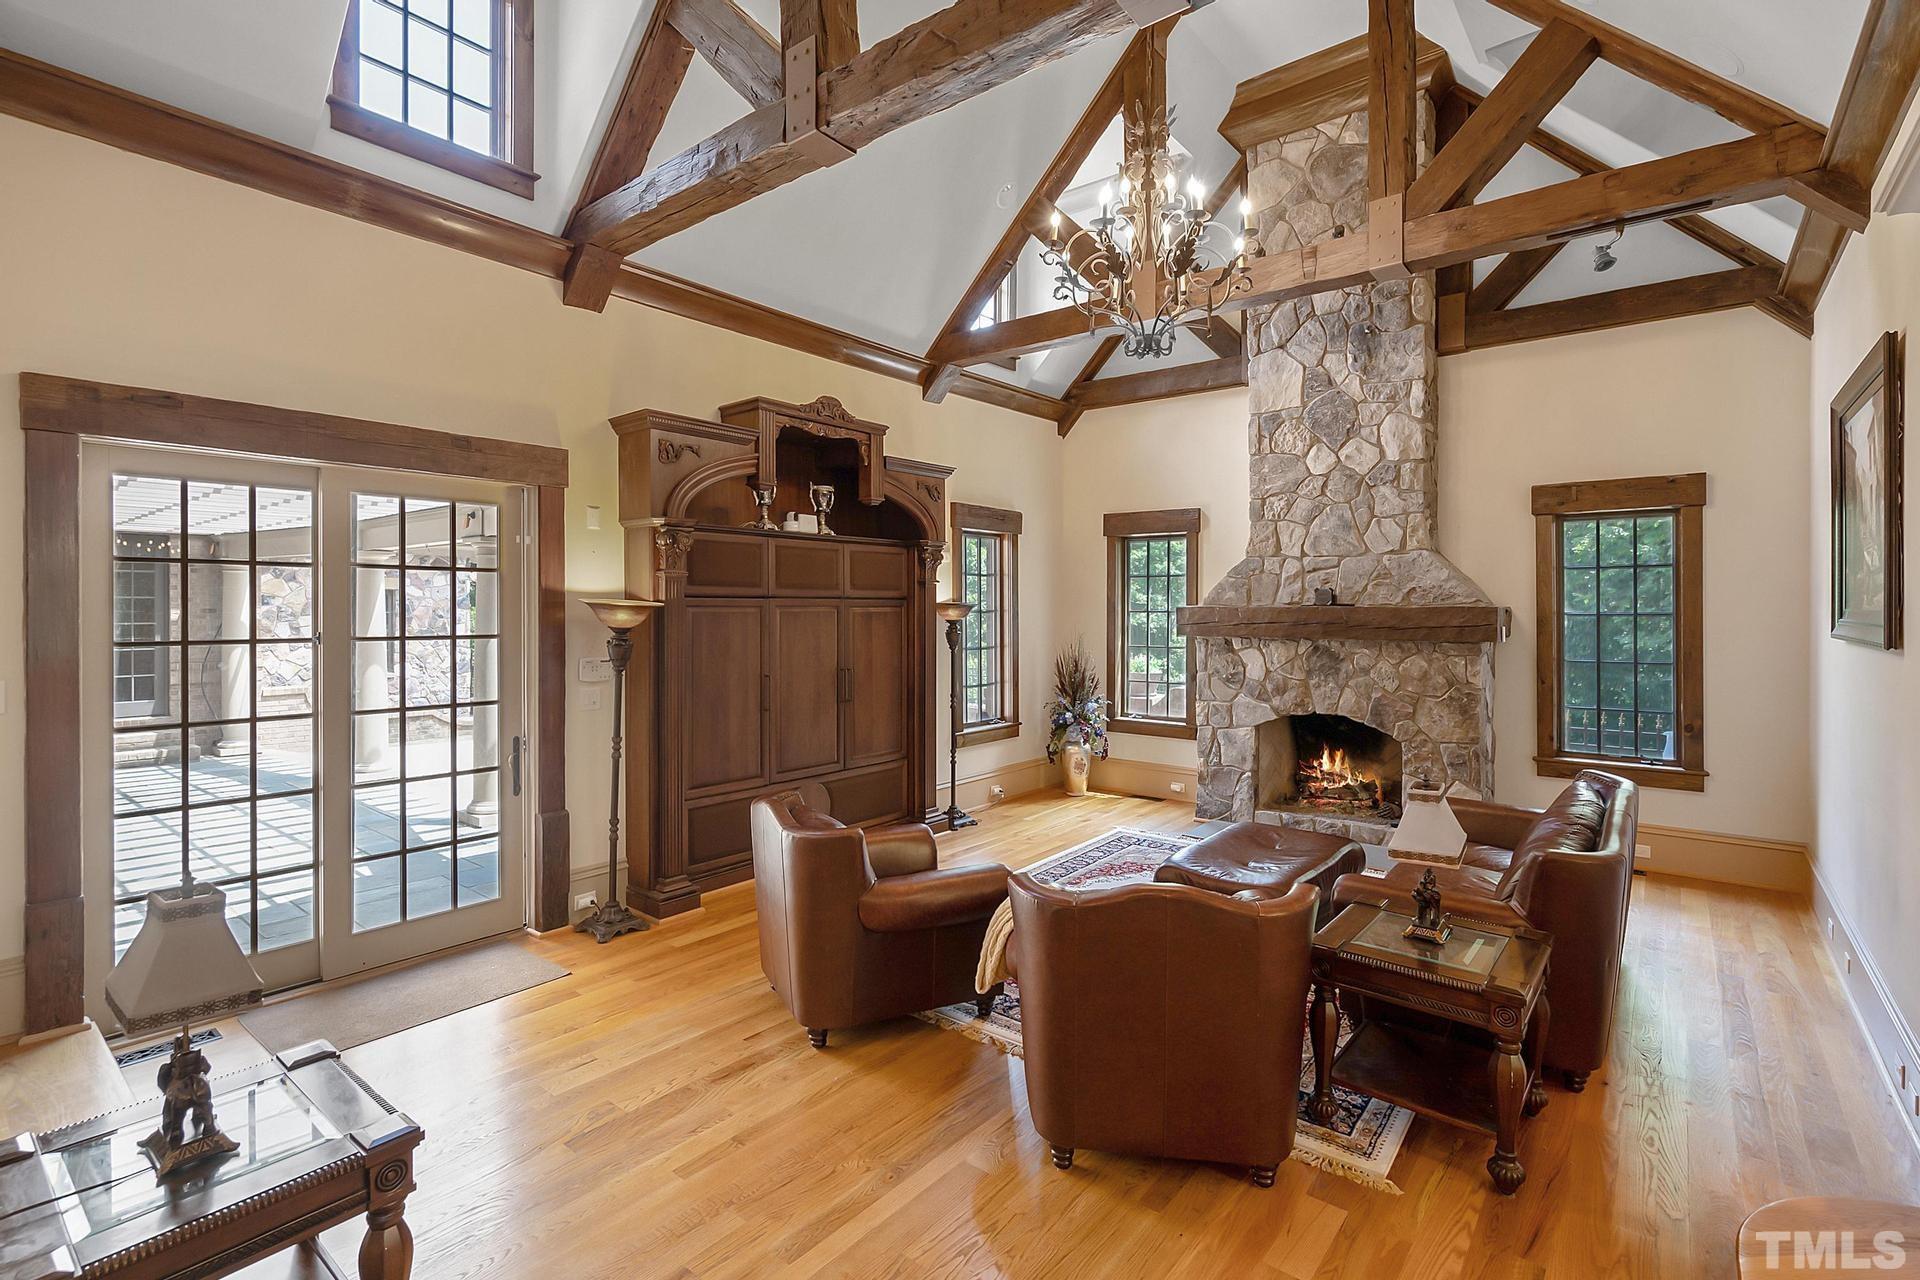 Exposed  wooden hammerbeam and the stone fireplace  exude comfort. Entry to the back patio and pool.